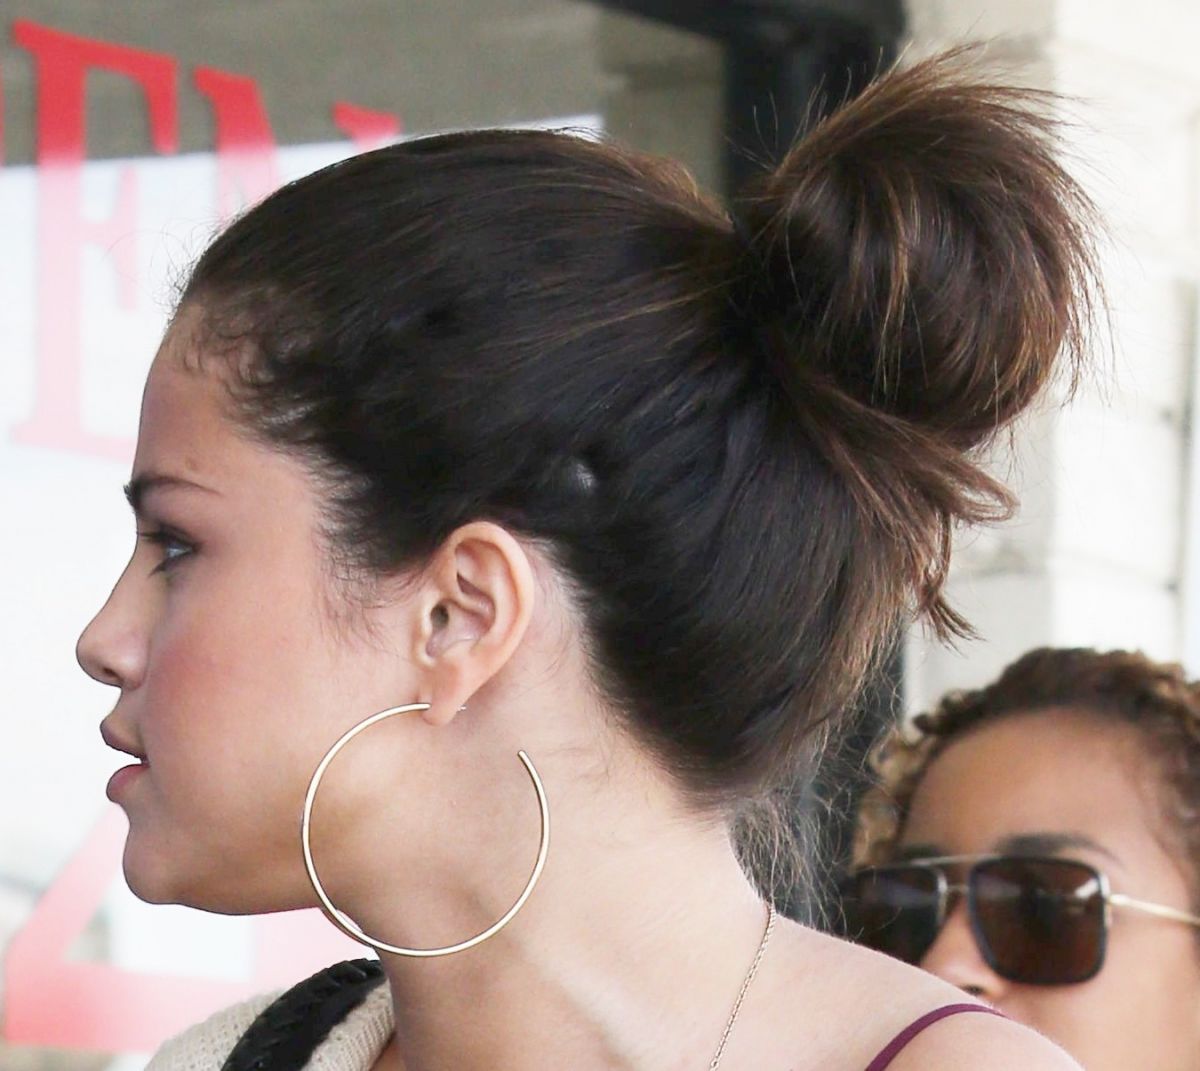 Selena Gomez Out About Los Angeles